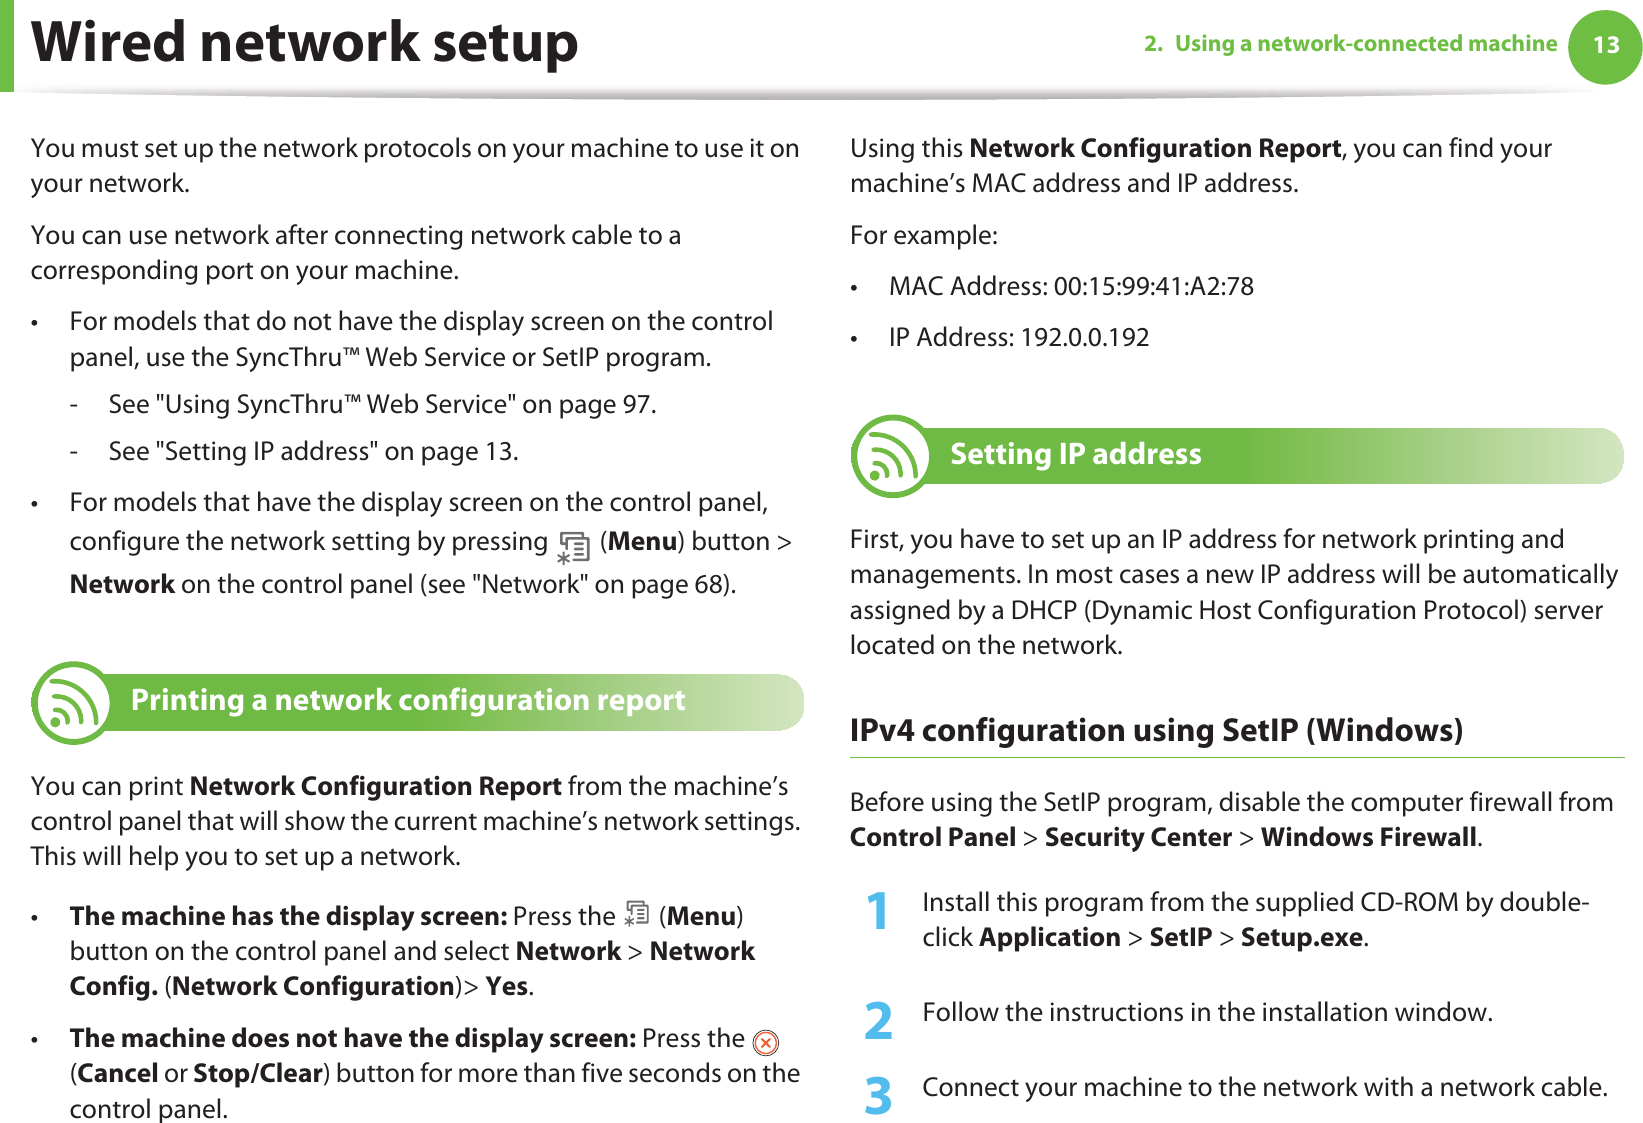 132. Using a network-connected machineWired network setupYou must set up the network protocols on your machine to use it on your network.You can use network after connecting network cable to a corresponding port on your machine. • For models that do not have the display screen on the control panel, use the SyncThru™ Web Service or SetIP program.- See &quot;Using SyncThru™ Web Service&quot; on page 97.- See &quot;Setting IP address&quot; on page 13.• For models that have the display screen on the control panel, configure the network setting by pressing   (Menu) button &gt; Network on the control panel (see &quot;Network&quot; on page 68).4 Printing a network configuration reportYou can print Network Configuration Report from the machine’s control panel that will show the current machine’s network settings. This will help you to set up a network.•The machine has the display screen: Press the   (Menu) button on the control panel and select Network &gt; Network Config. (Network Configuration)&gt; Yes.•The machine does not have the display screen: Press the   (Cancel or Stop/Clear) button for more than five seconds on the control panel.Using this Network Configuration Report, you can find your machine’s MAC address and IP address.For example:• MAC Address: 00:15:99:41:A2:78• IP Address: 192.0.0.1925 Setting IP addressFirst, you have to set up an IP address for network printing and managements. In most cases a new IP address will be automatically assigned by a DHCP (Dynamic Host Configuration Protocol) server located on the network.IPv4 configuration using SetIP (Windows)Before using the SetIP program, disable the computer firewall from Control Panel &gt; Security Center &gt; Windows Firewall.1Install this program from the supplied CD-ROM by double-click Application &gt; SetIP &gt; Setup.exe.2  Follow the instructions in the installation window.3  Connect your machine to the network with a network cable.